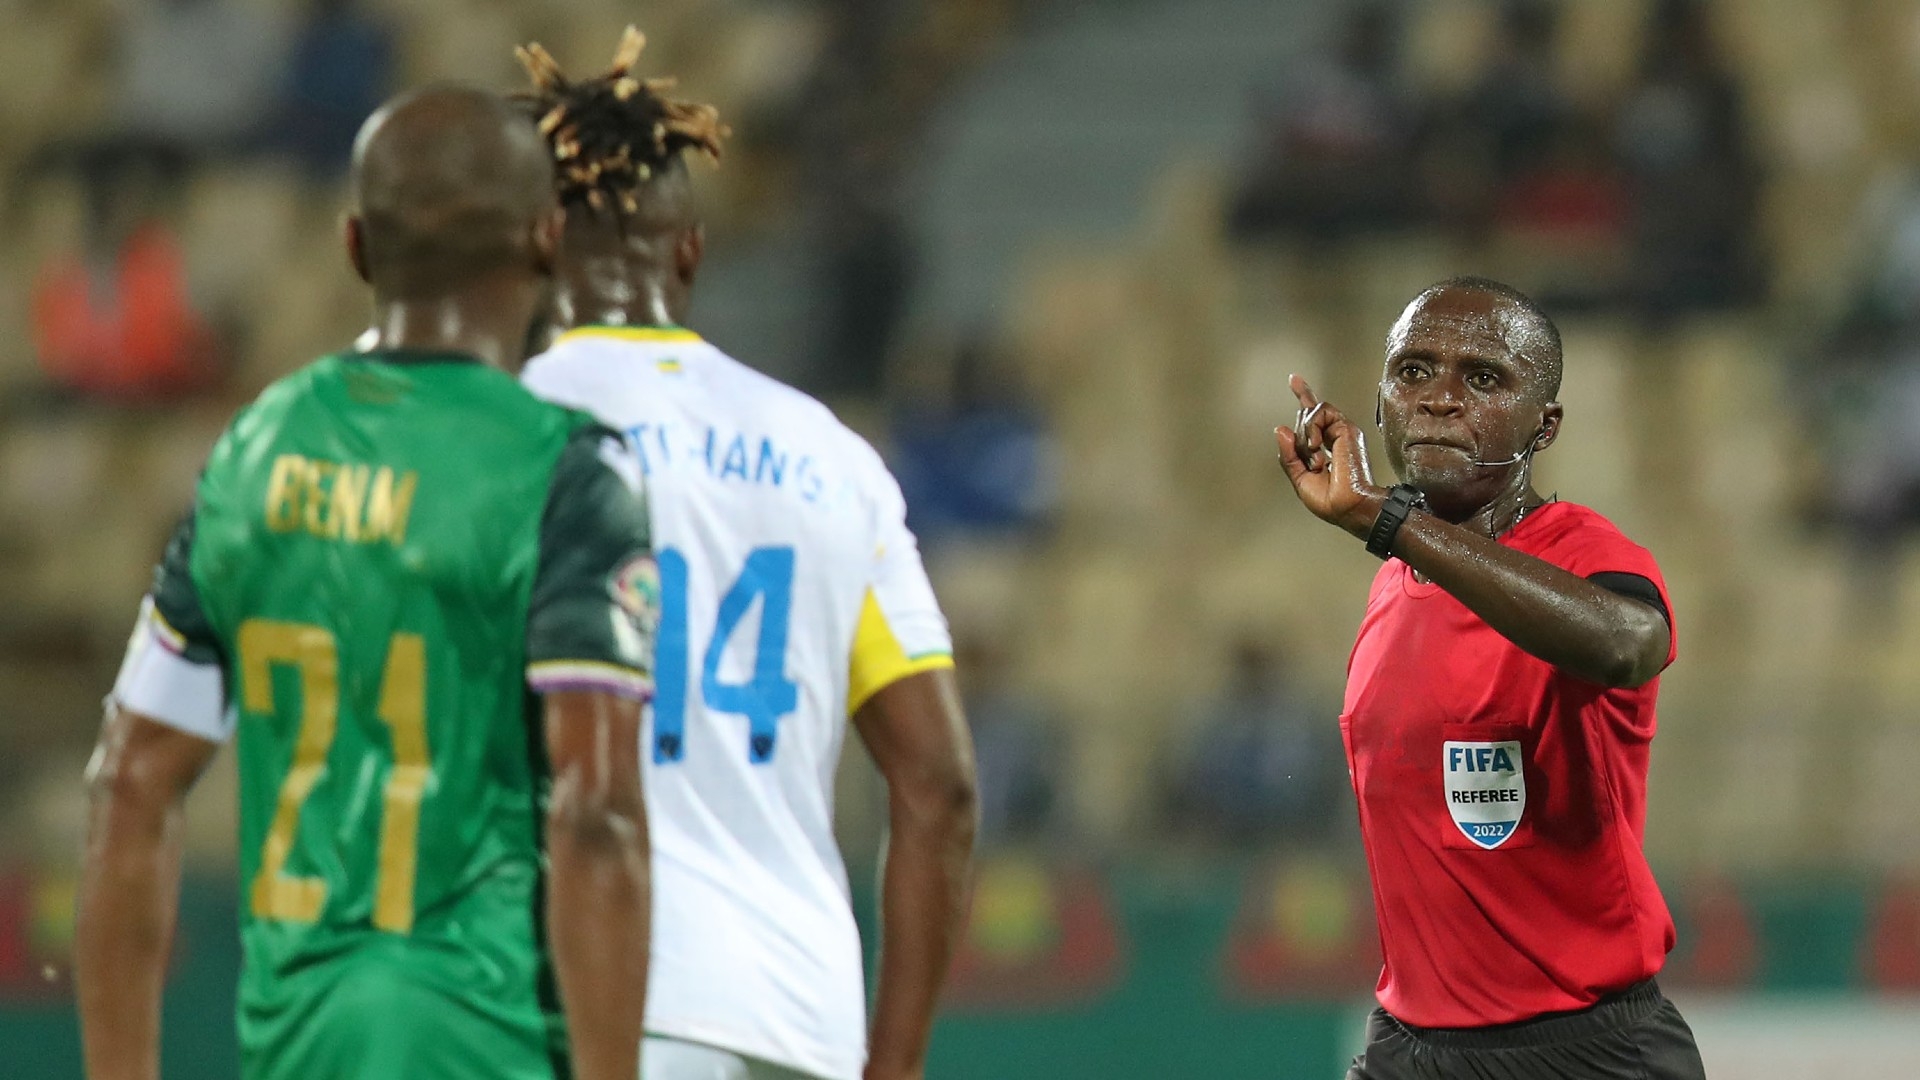 Afcon 2021: All you need to know about referee Waweru who is flying Kenya flag in Cameroon | Goal.com